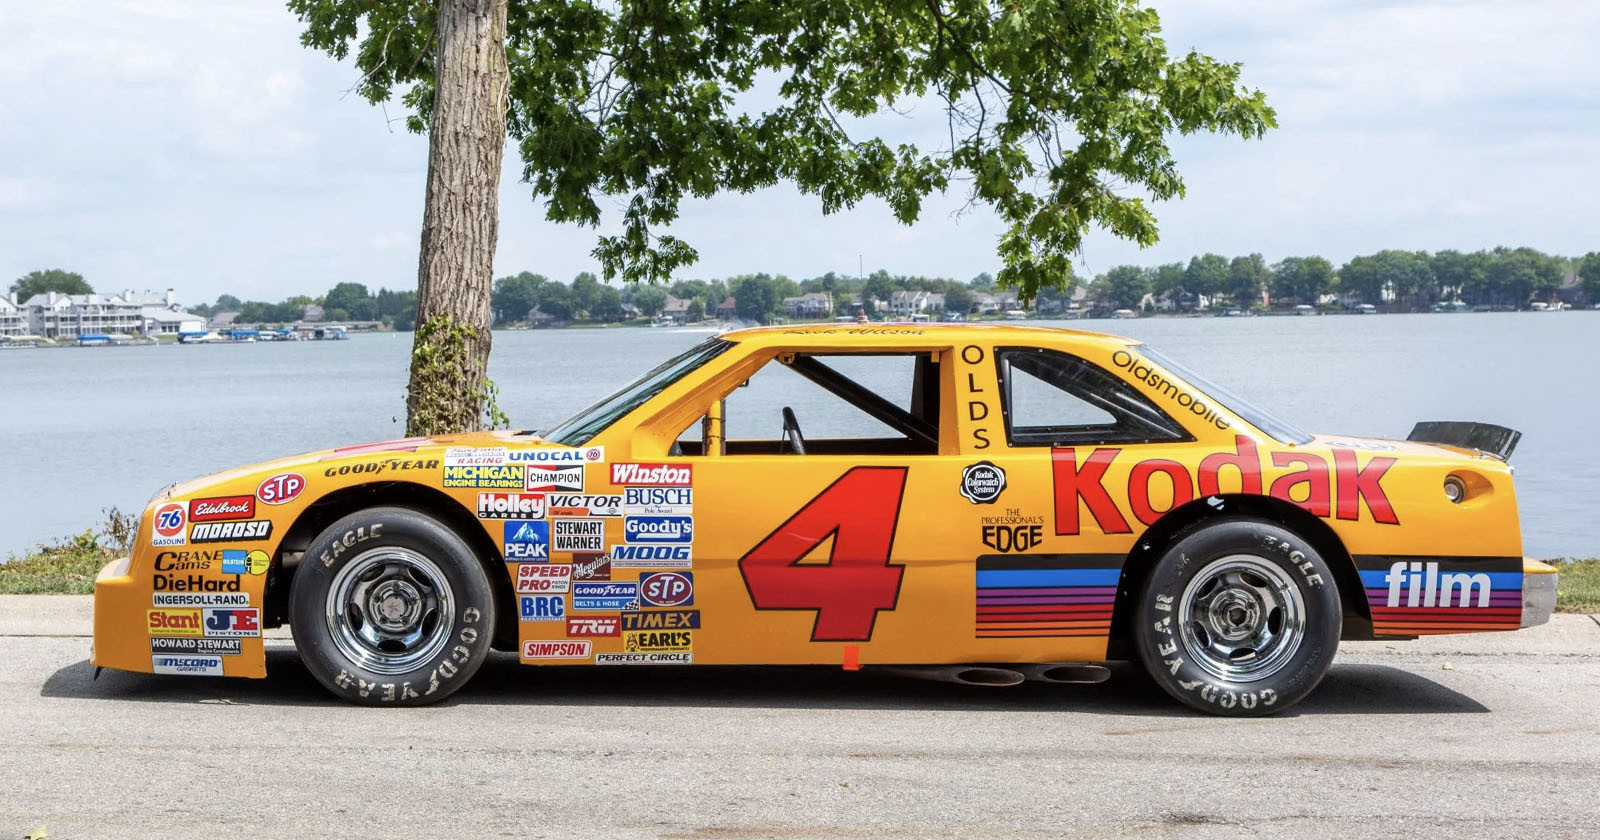 Bright Yellow 1988 Kodak-Branded NASCAR Racer Goes to Auction